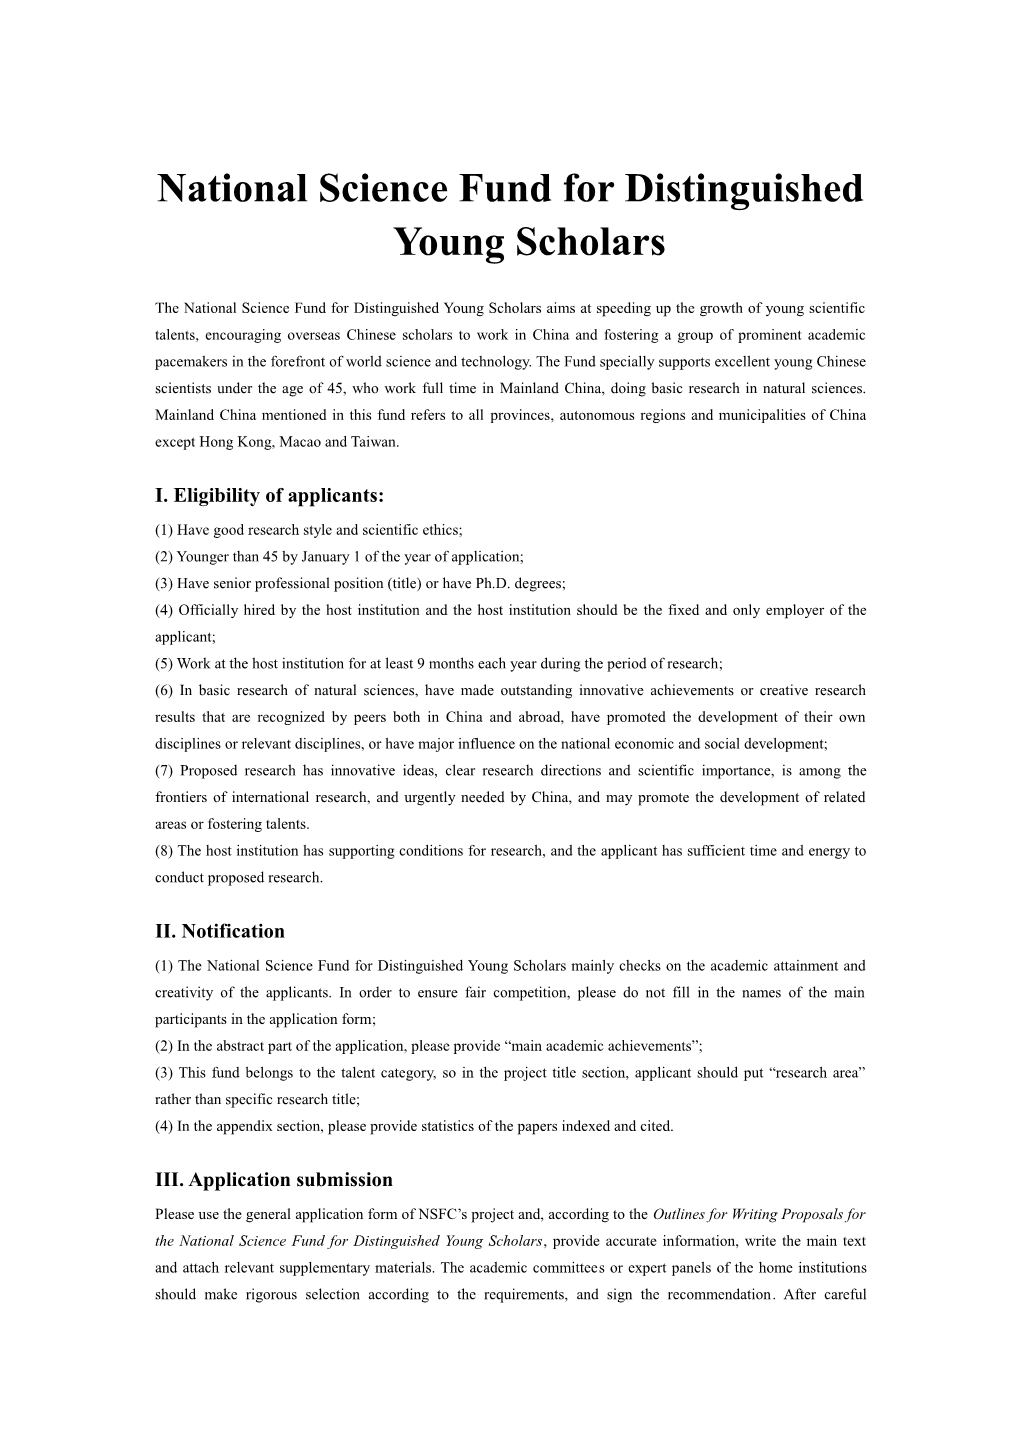 National Science Fund for Distinguished Young Scholars